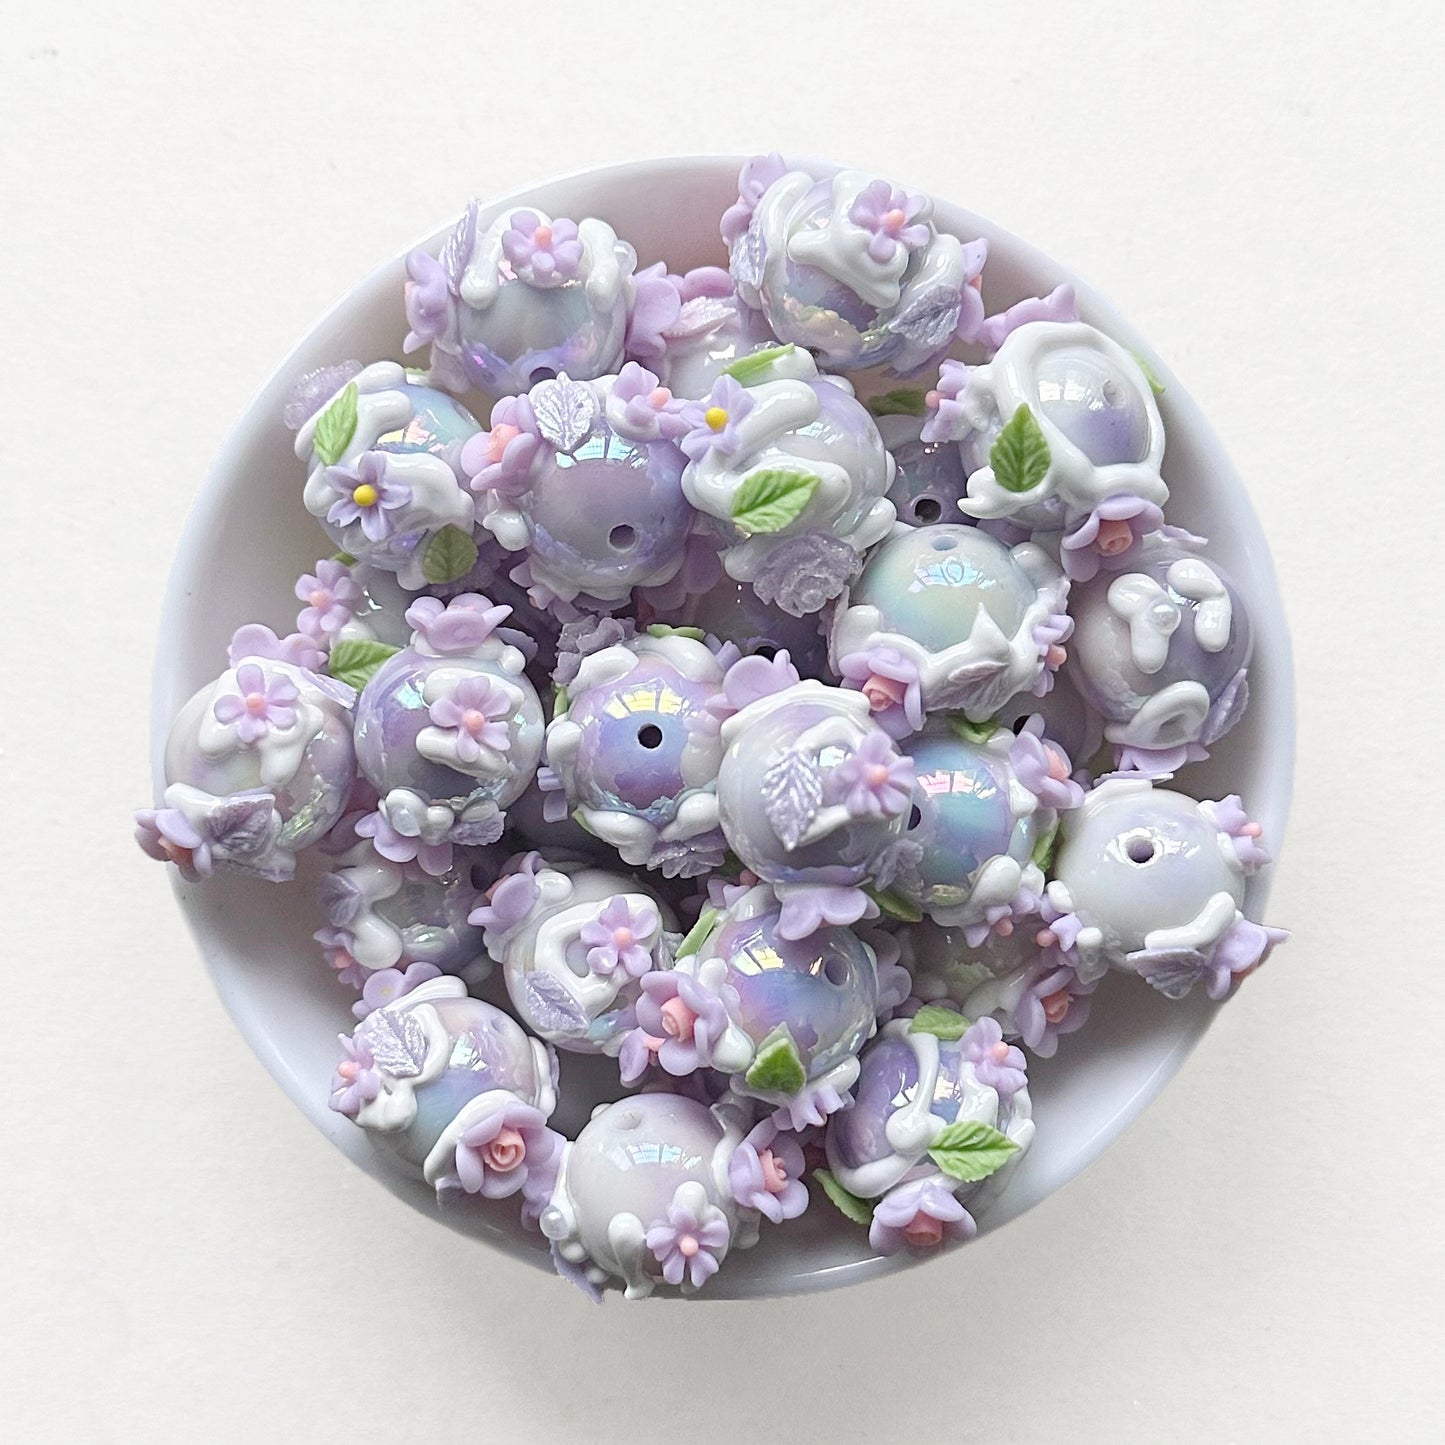 10pcs/Lot Fancy Purple Floral Beads Mix, Gumball Acrylic Beads